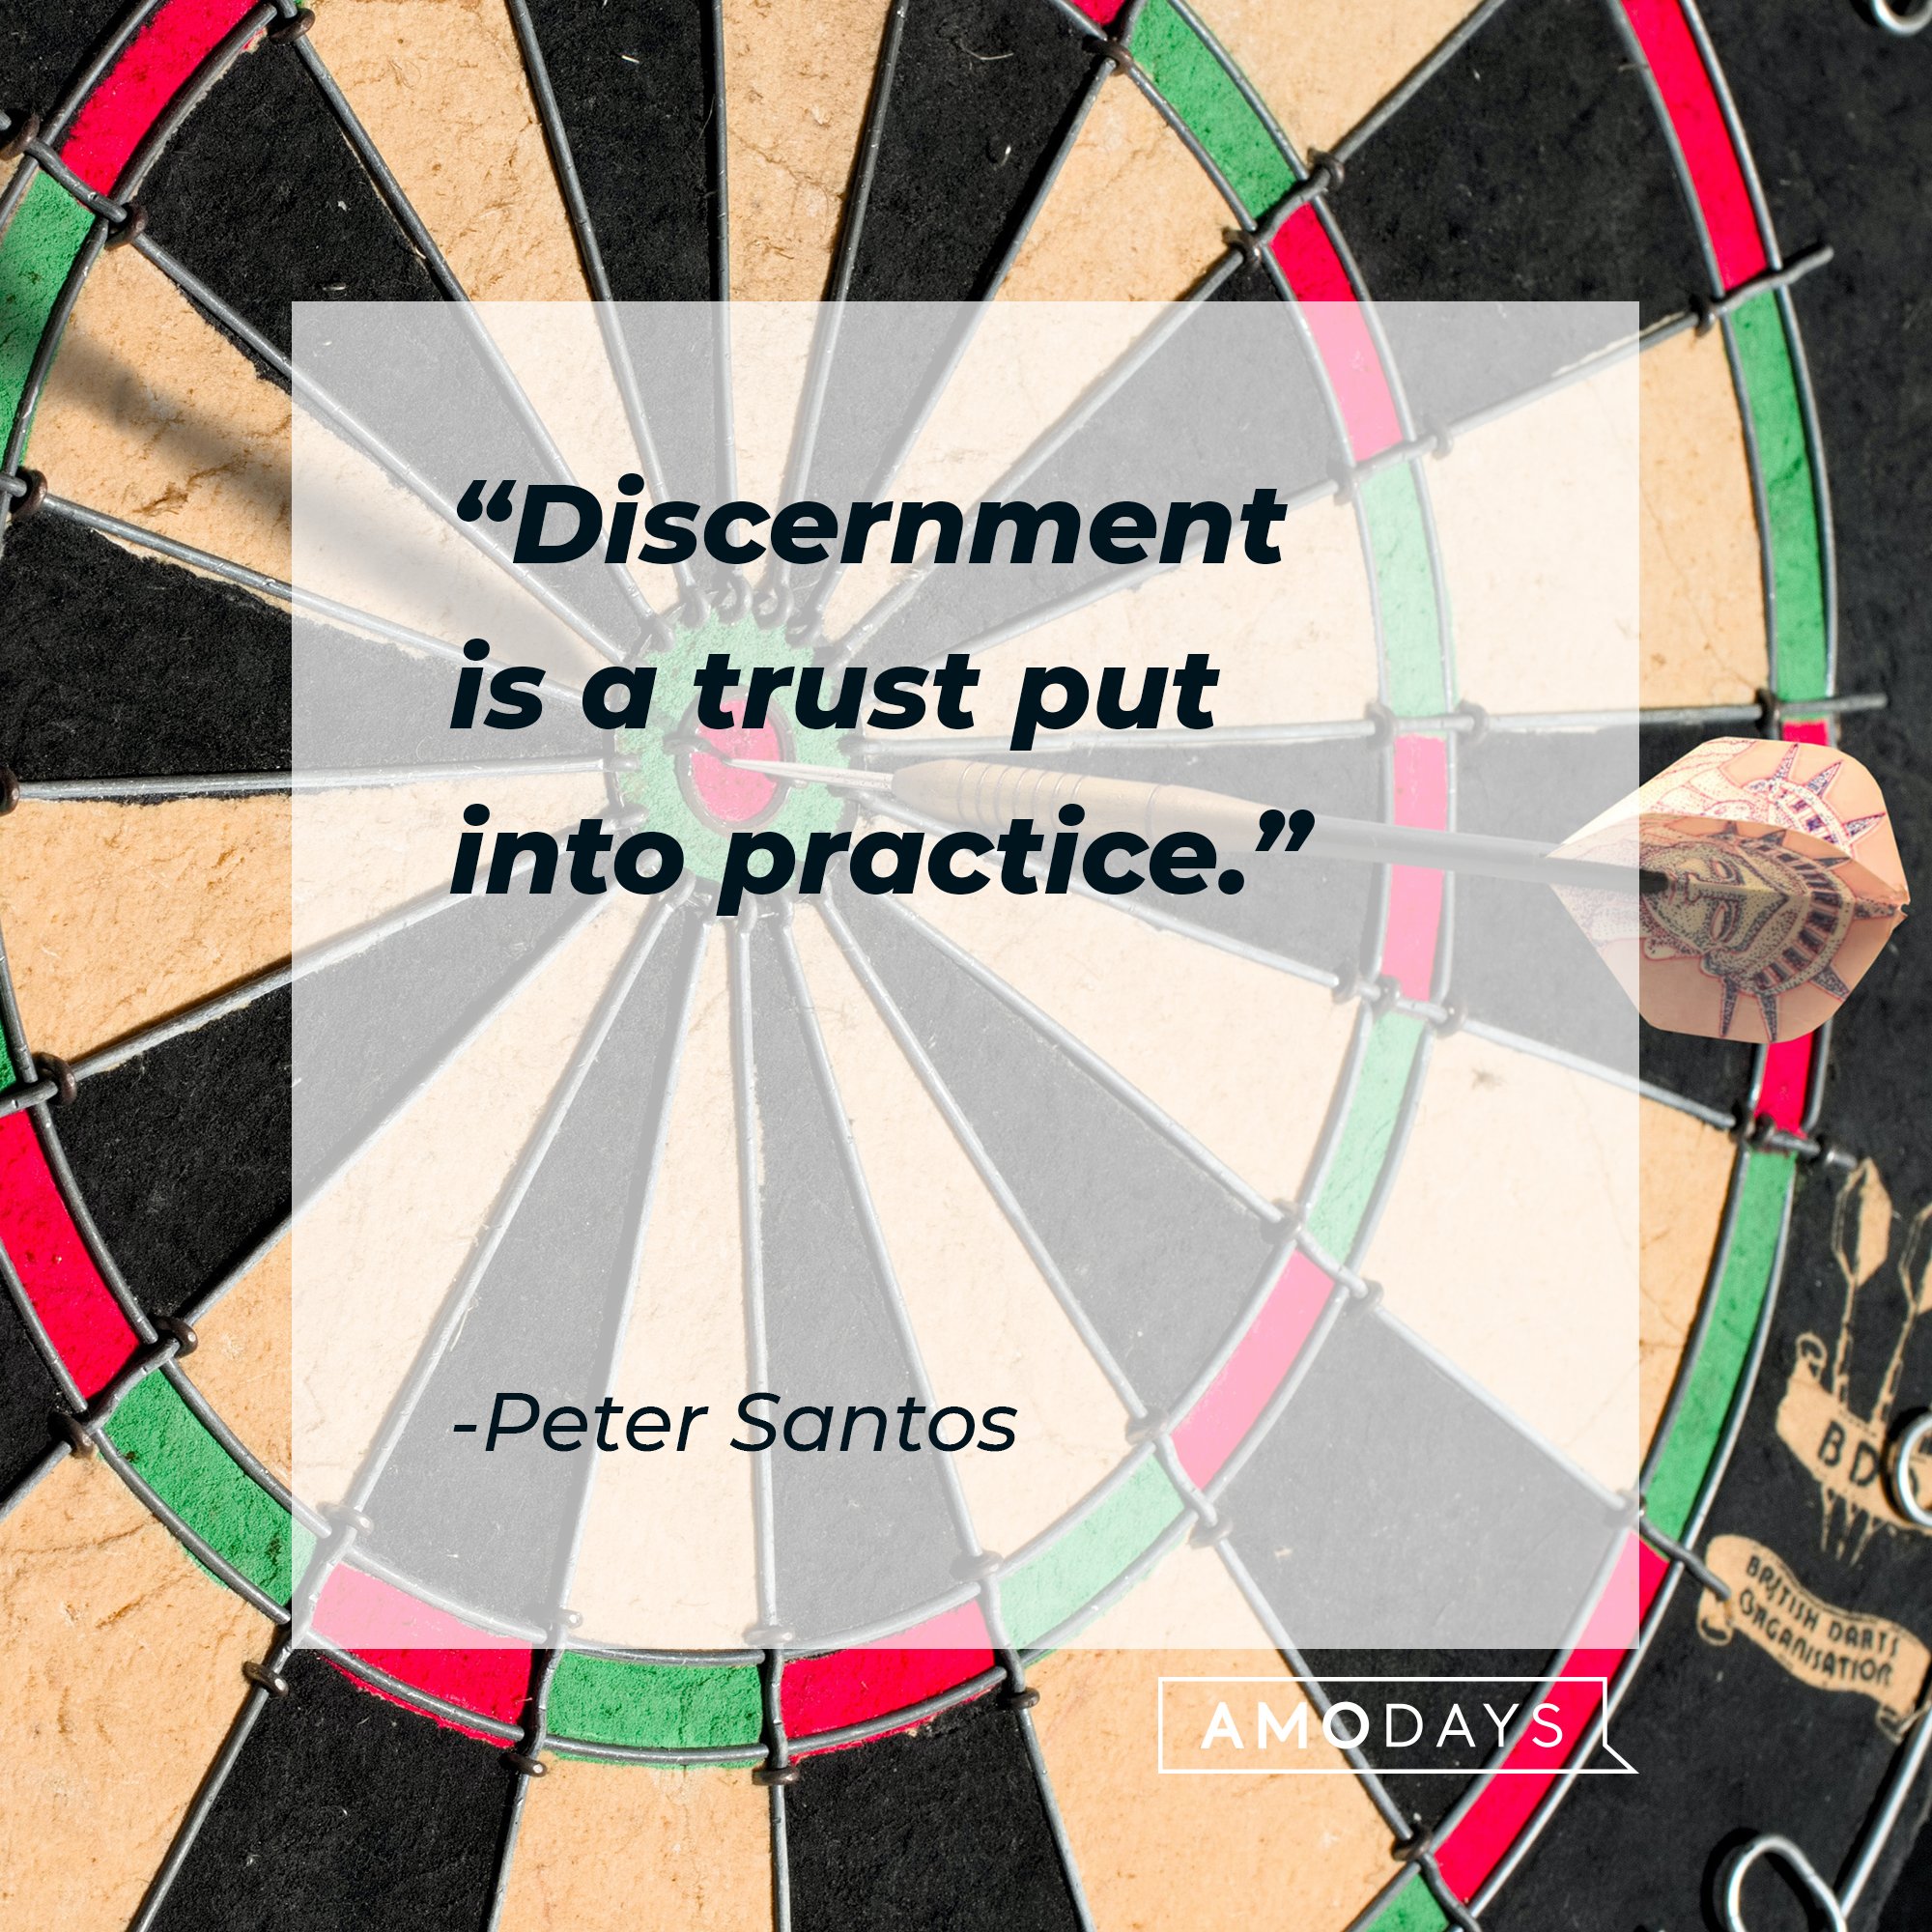 Peter Santos’ quote: "Discernment is a trust put into practice."  | Image: AmoDays